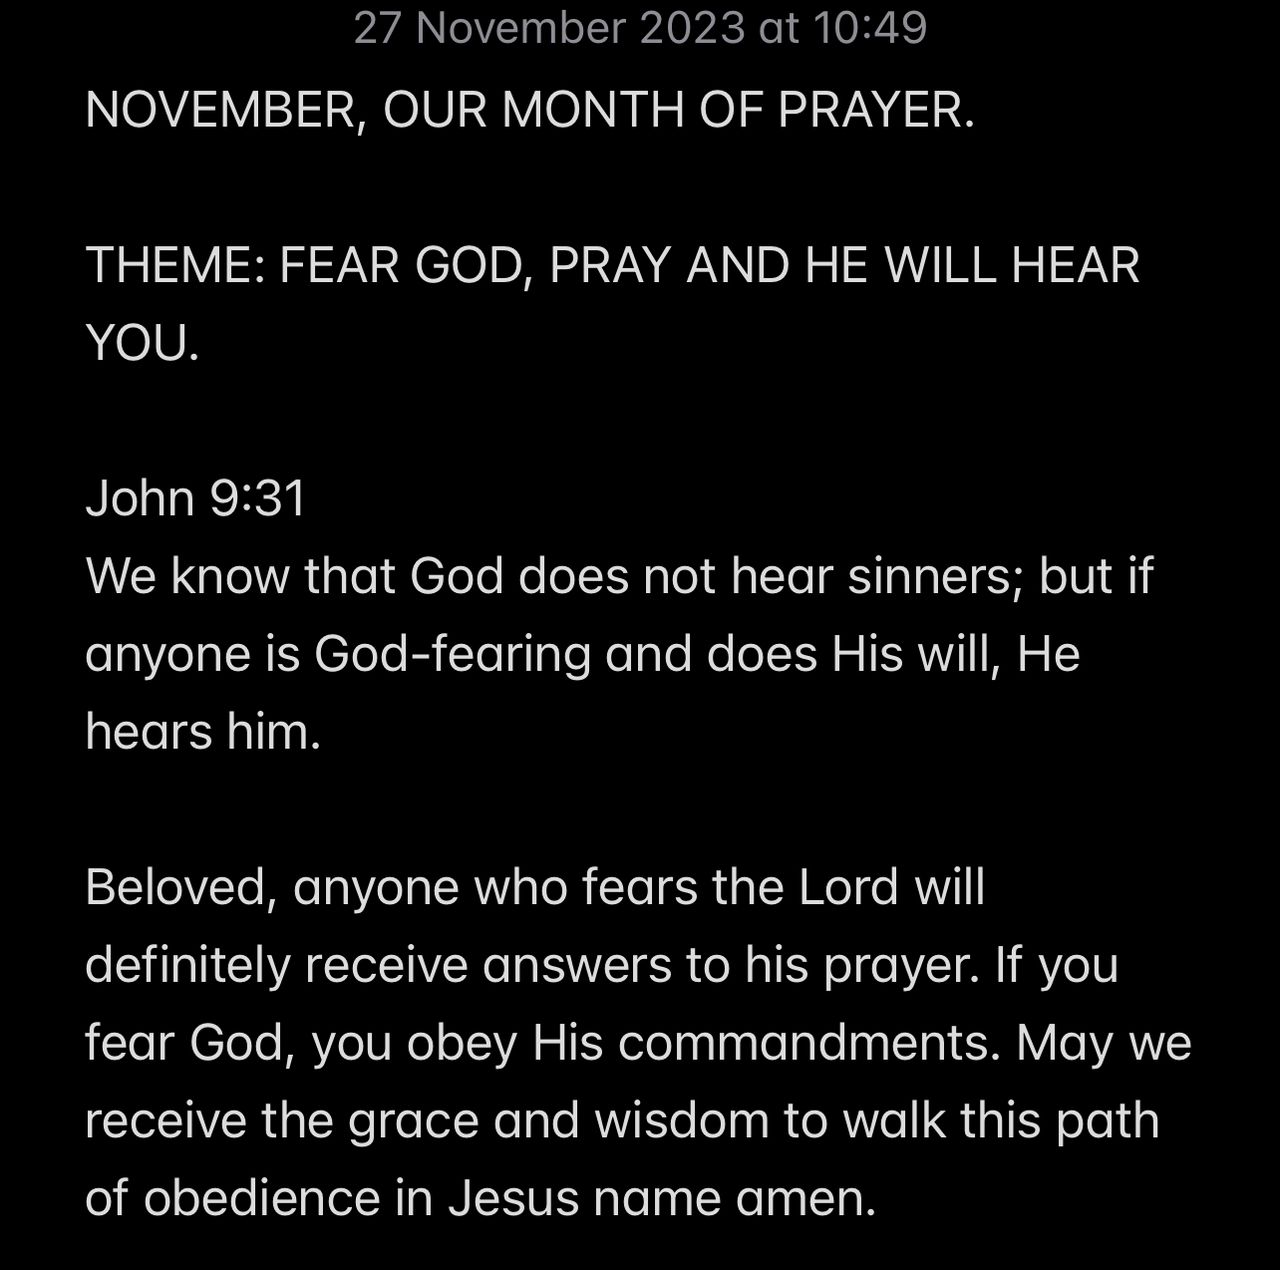 FEAR GOD, PRAY AND HE WILL HEAR YOU